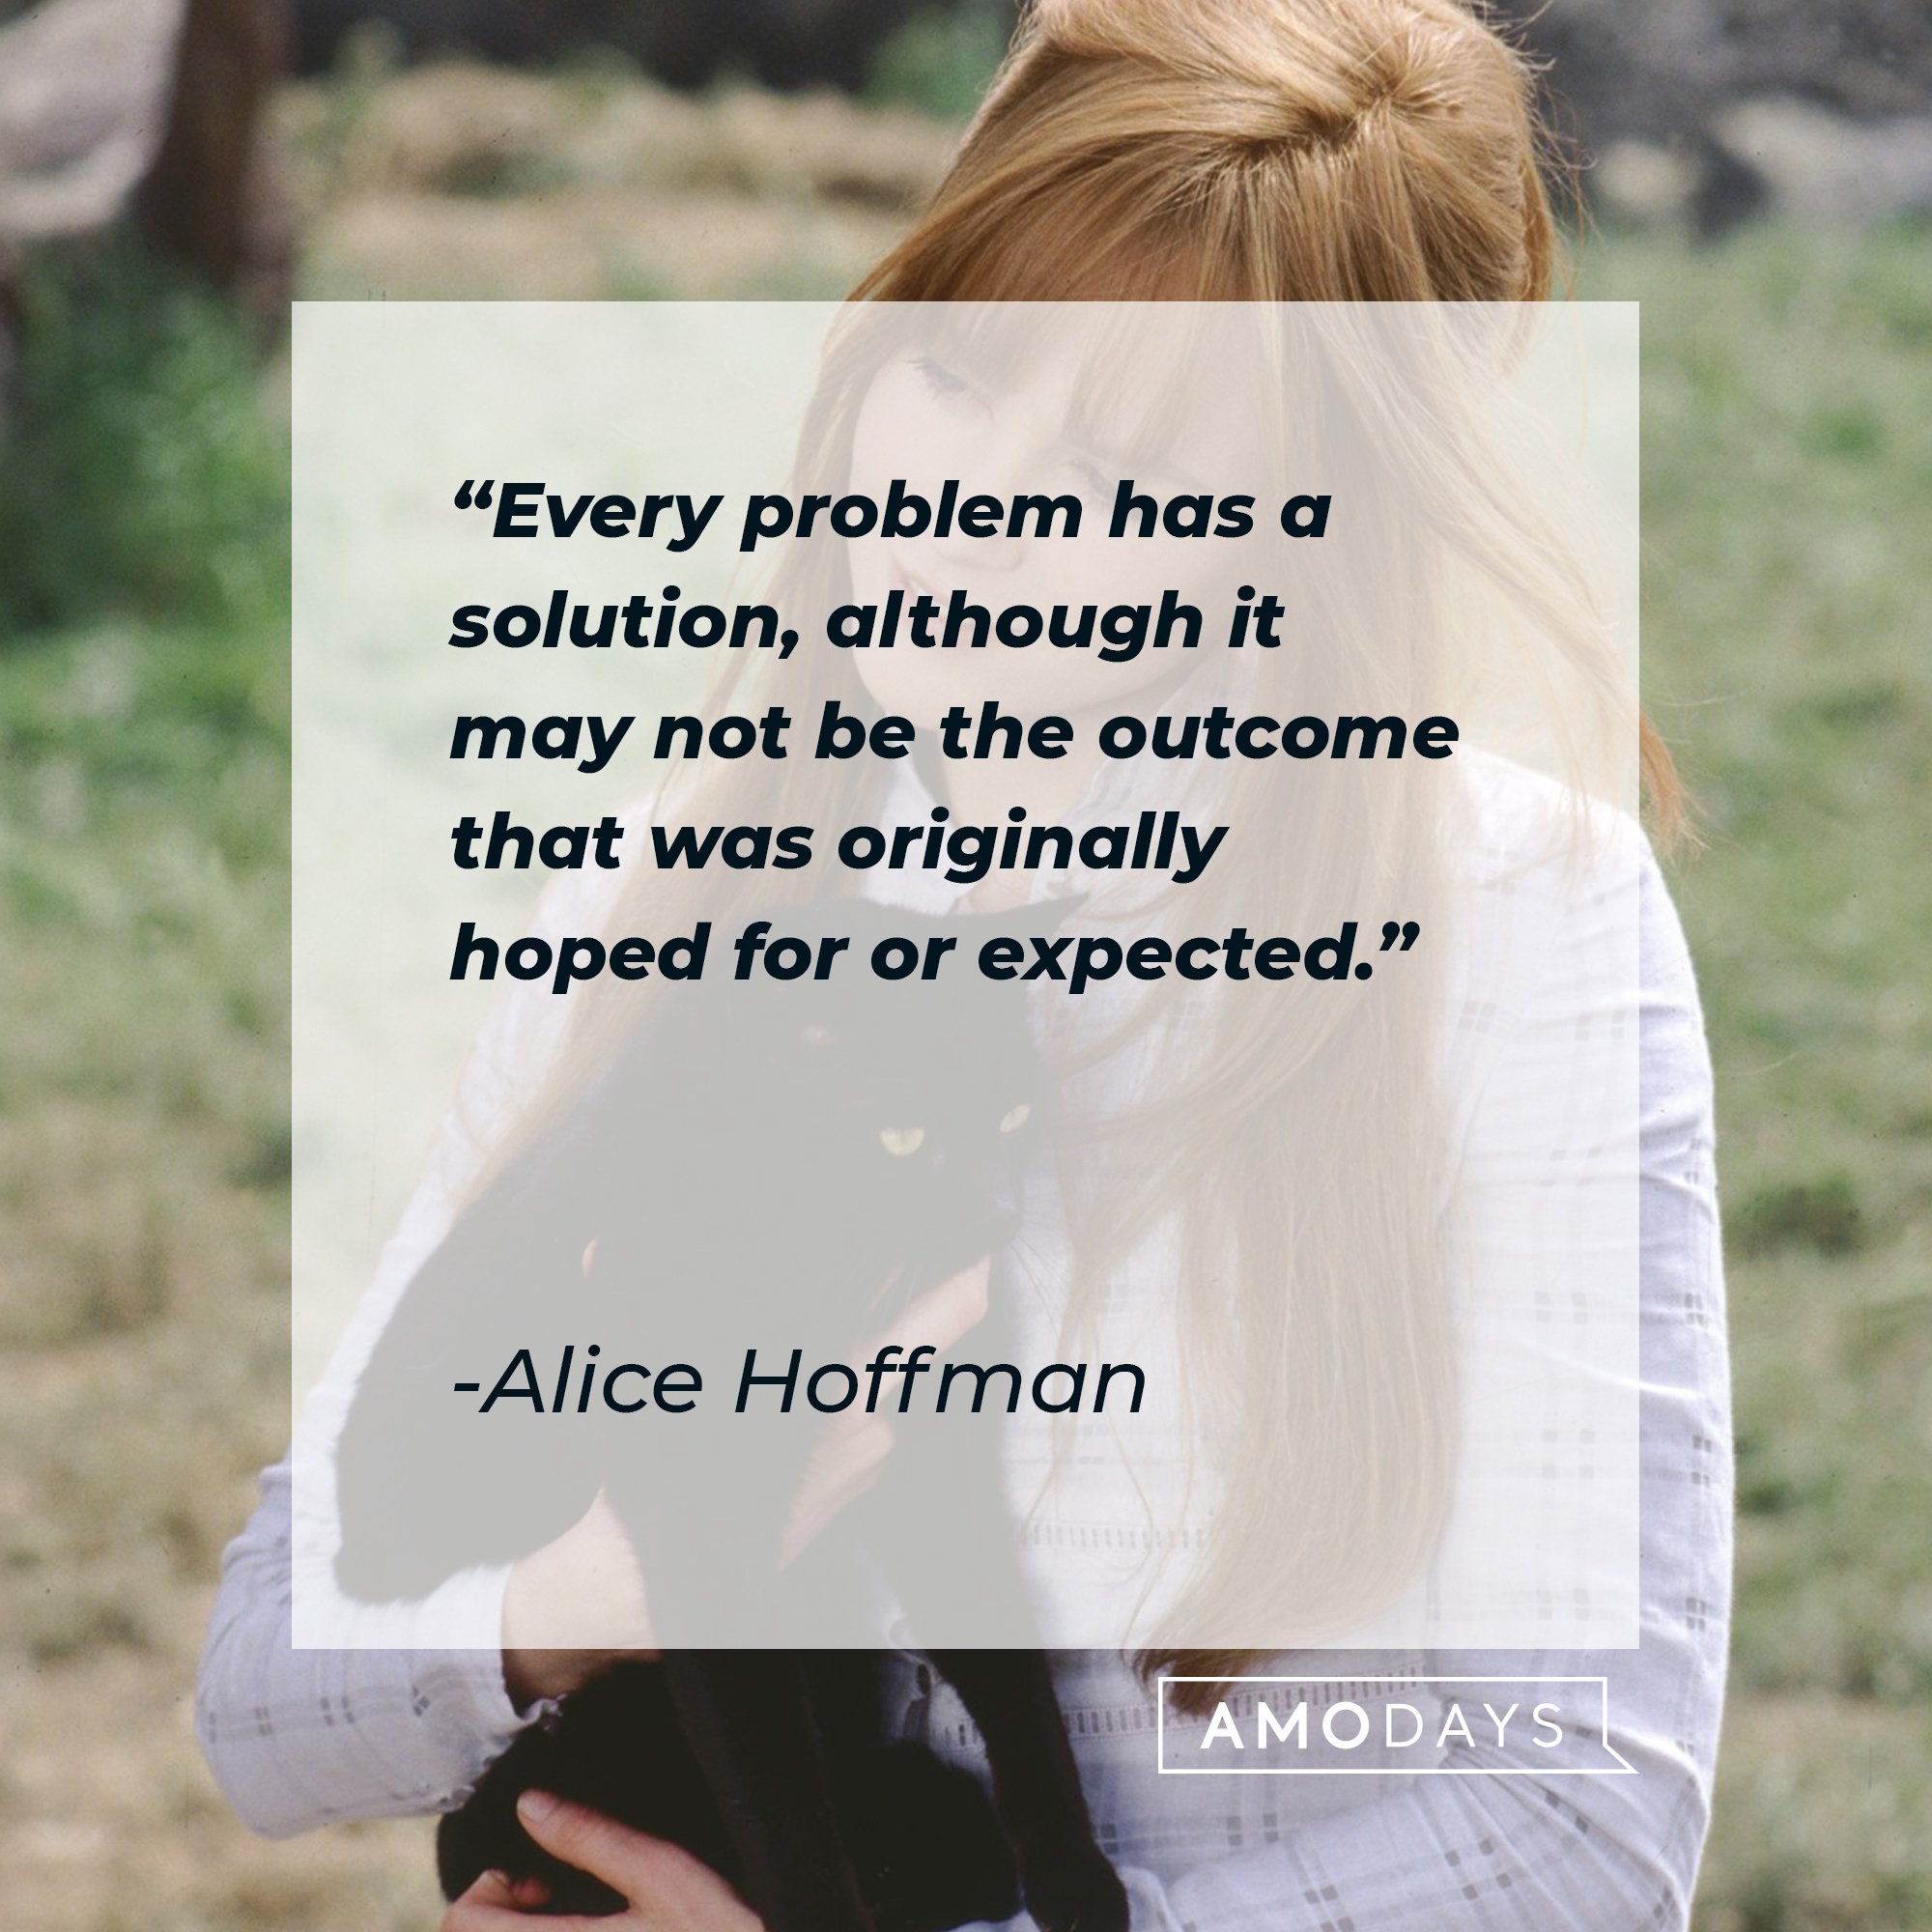   Alice Hoffman’s quote: "Every problem has a solution, although it may not be the outcome that was originally hoped for or expected." | Image: AmoDays